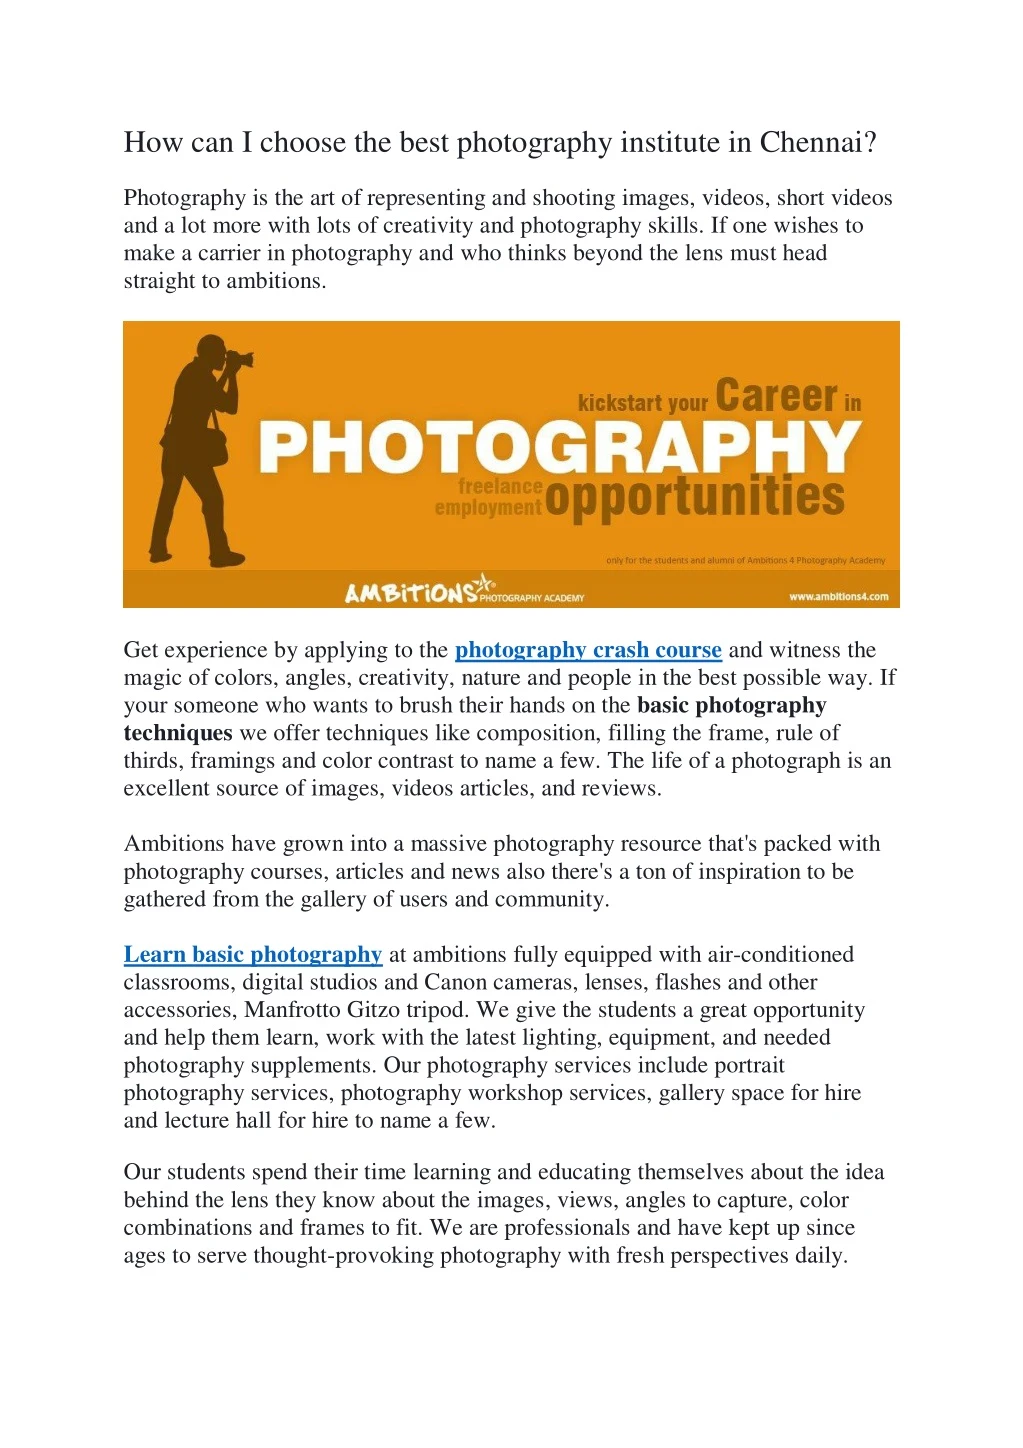 how can i choose the best photography institute